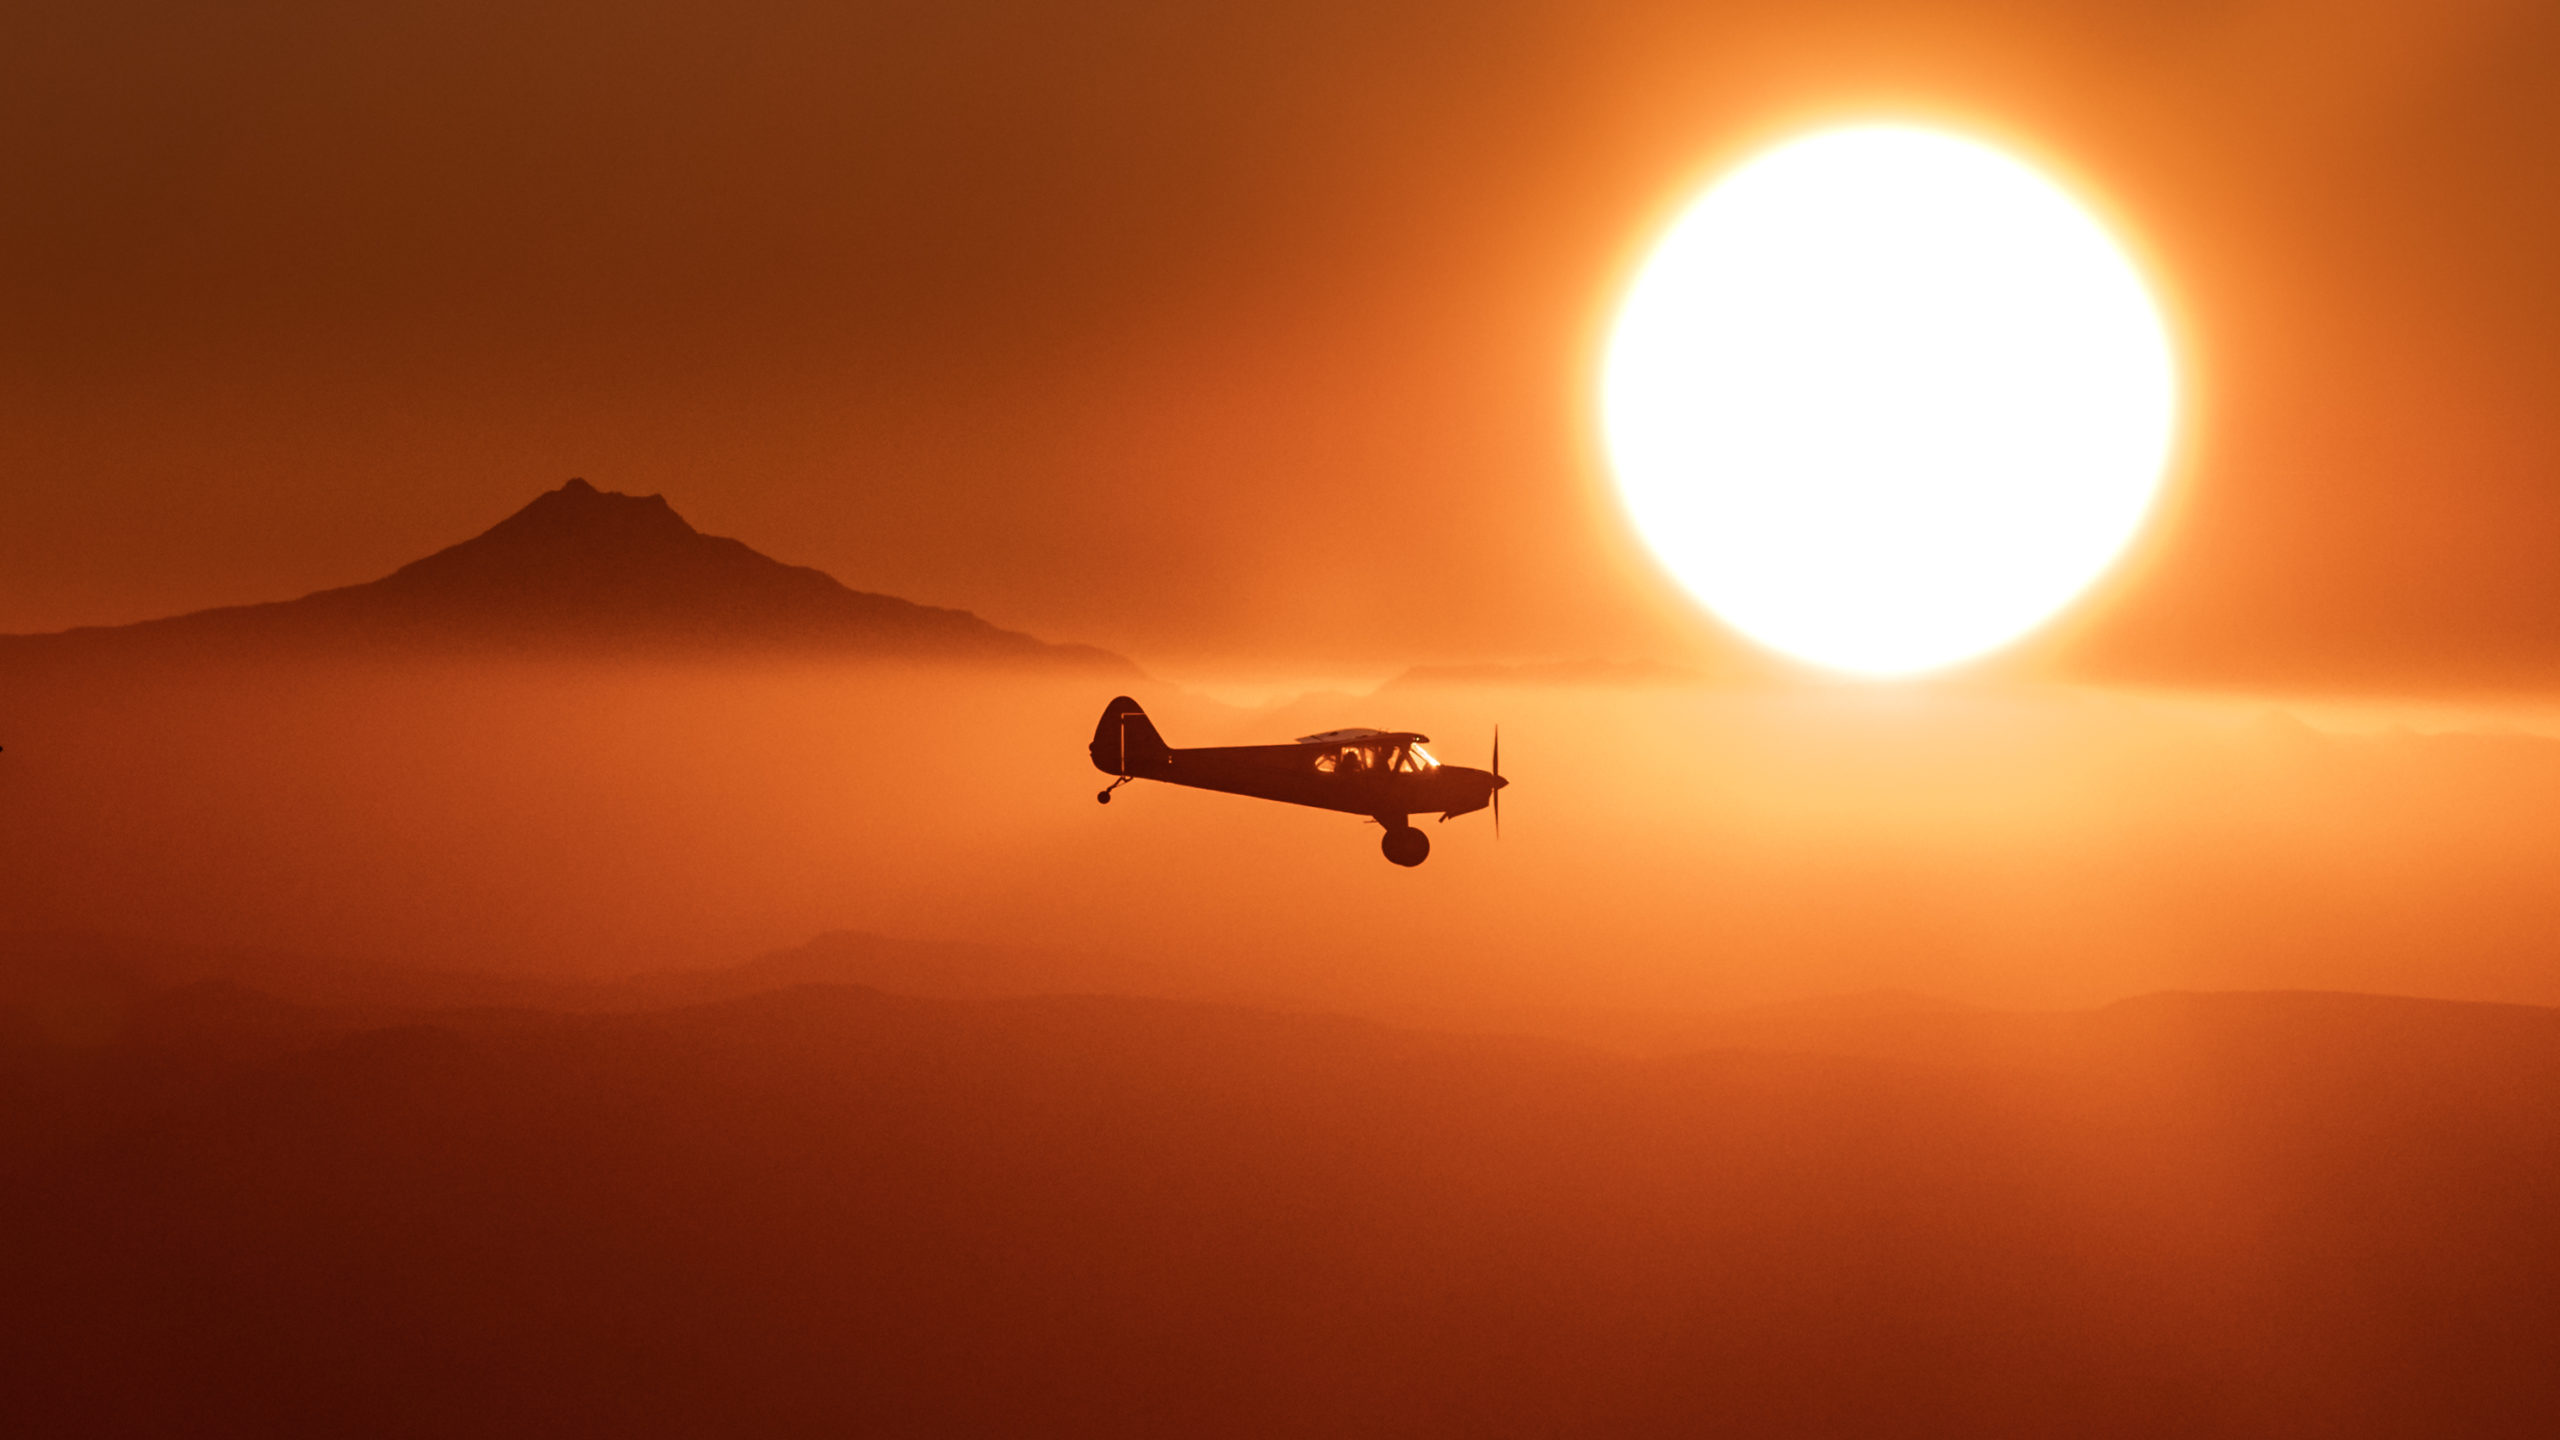 Aviation Landscape photography of a Carbon Cub airplane flying over Oregon during sunset.